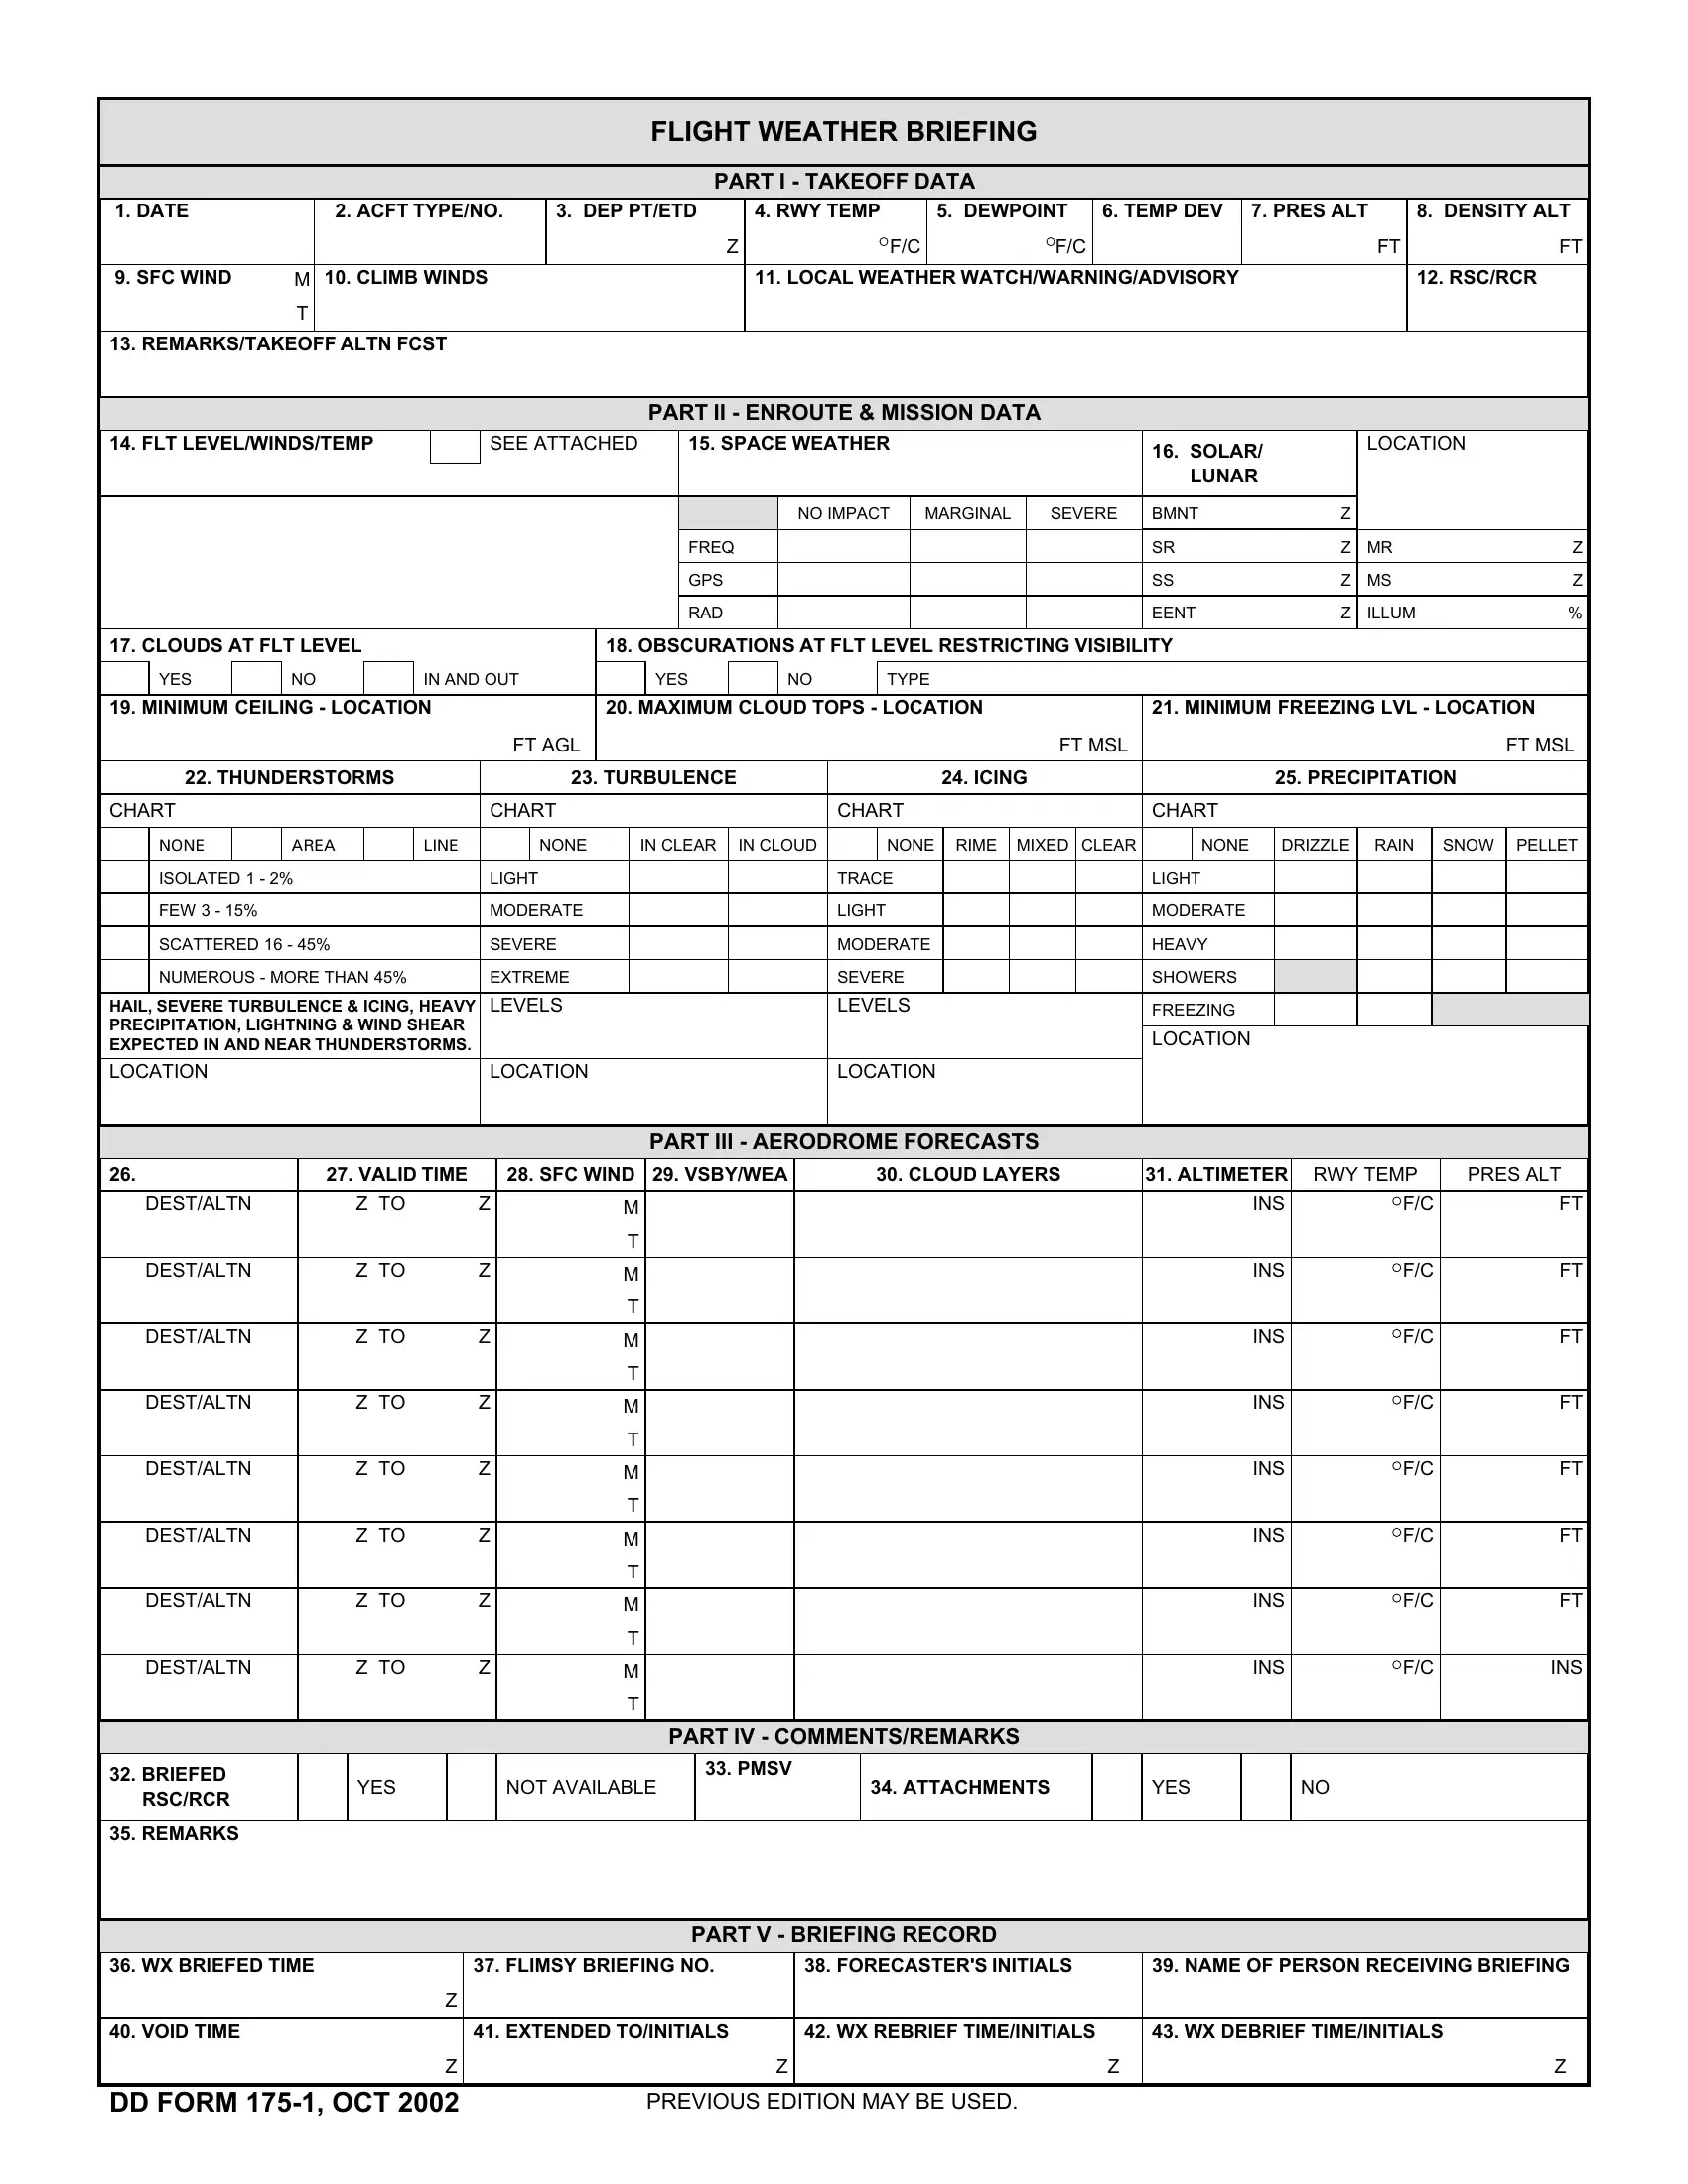 dd-form-175-1-fill-out-printable-pdf-forms-online